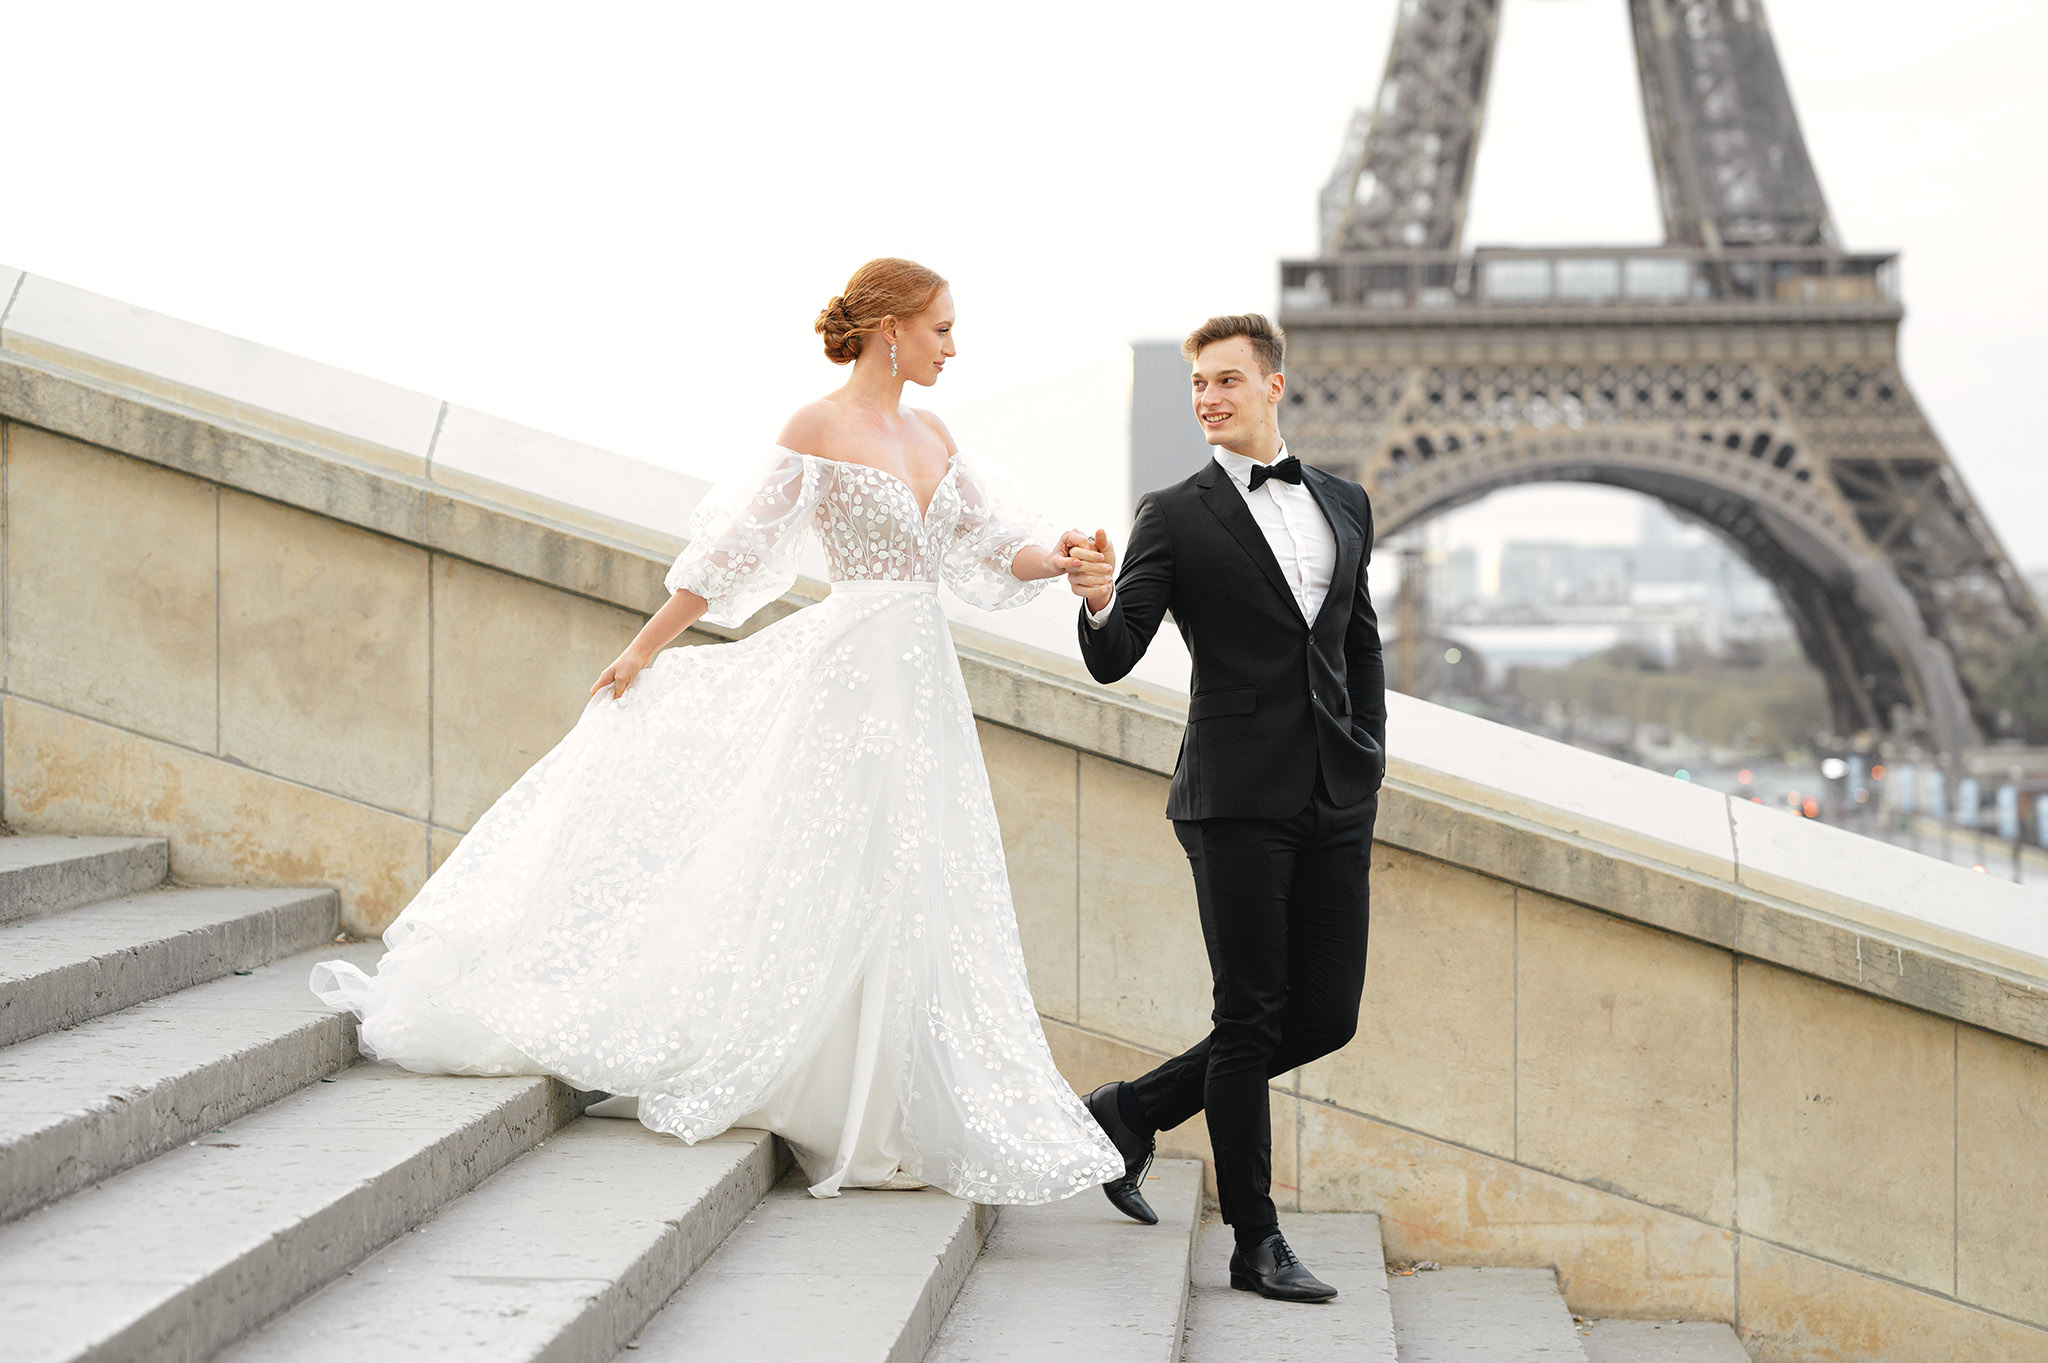 Bride and groom walking in front of Eiffel Tower in Paris France